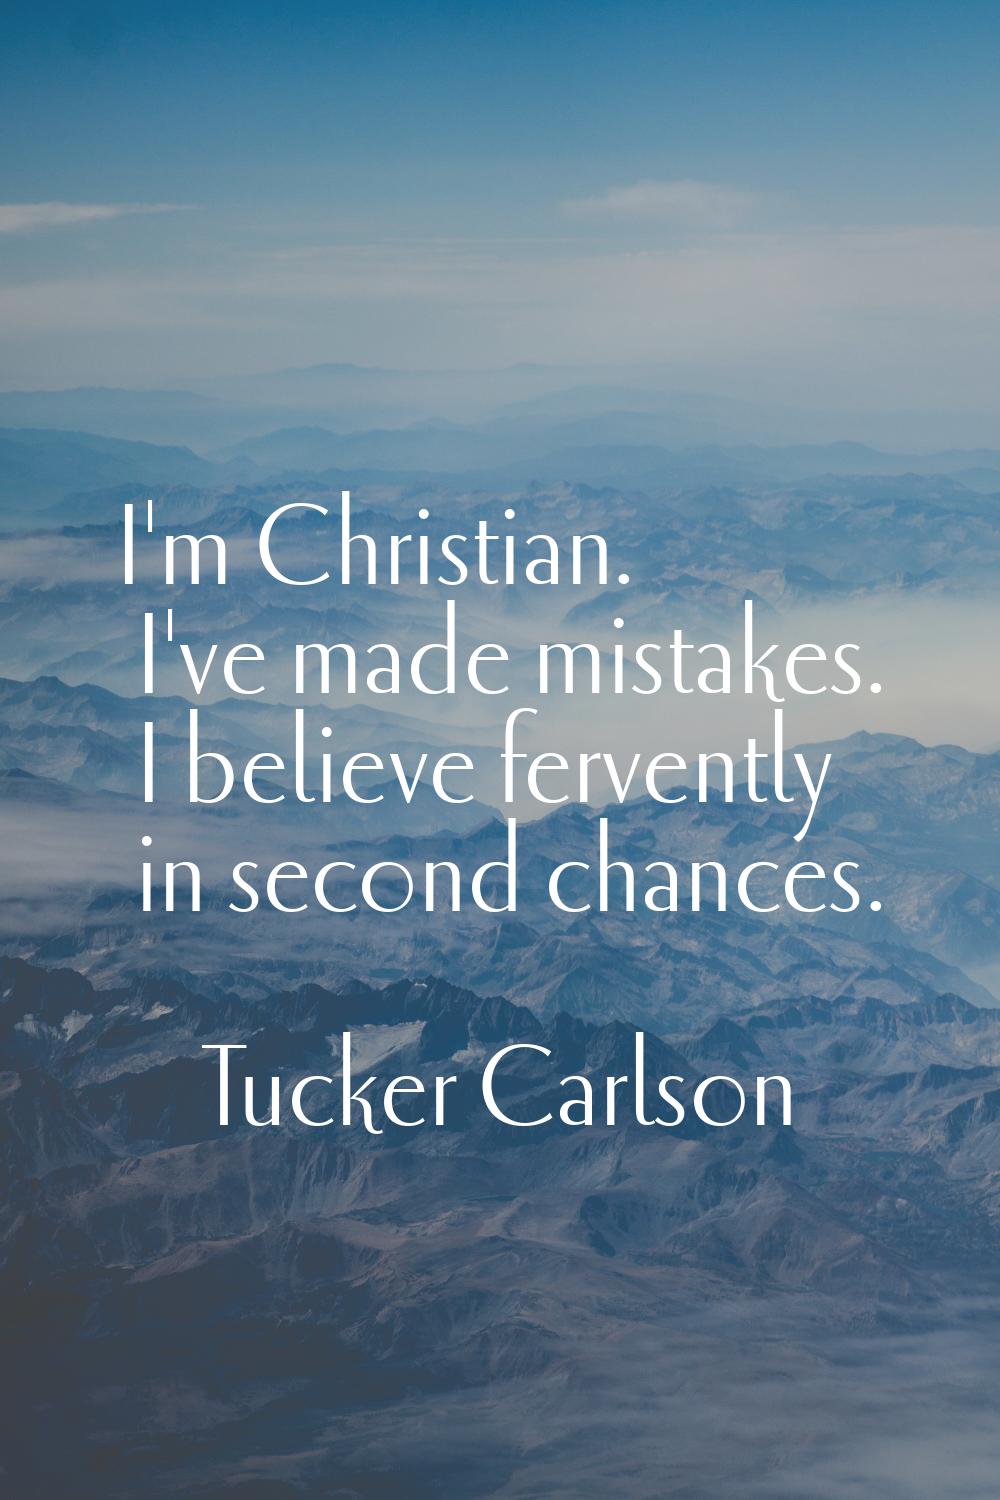 I'm Christian. I've made mistakes. I believe fervently in second chances.